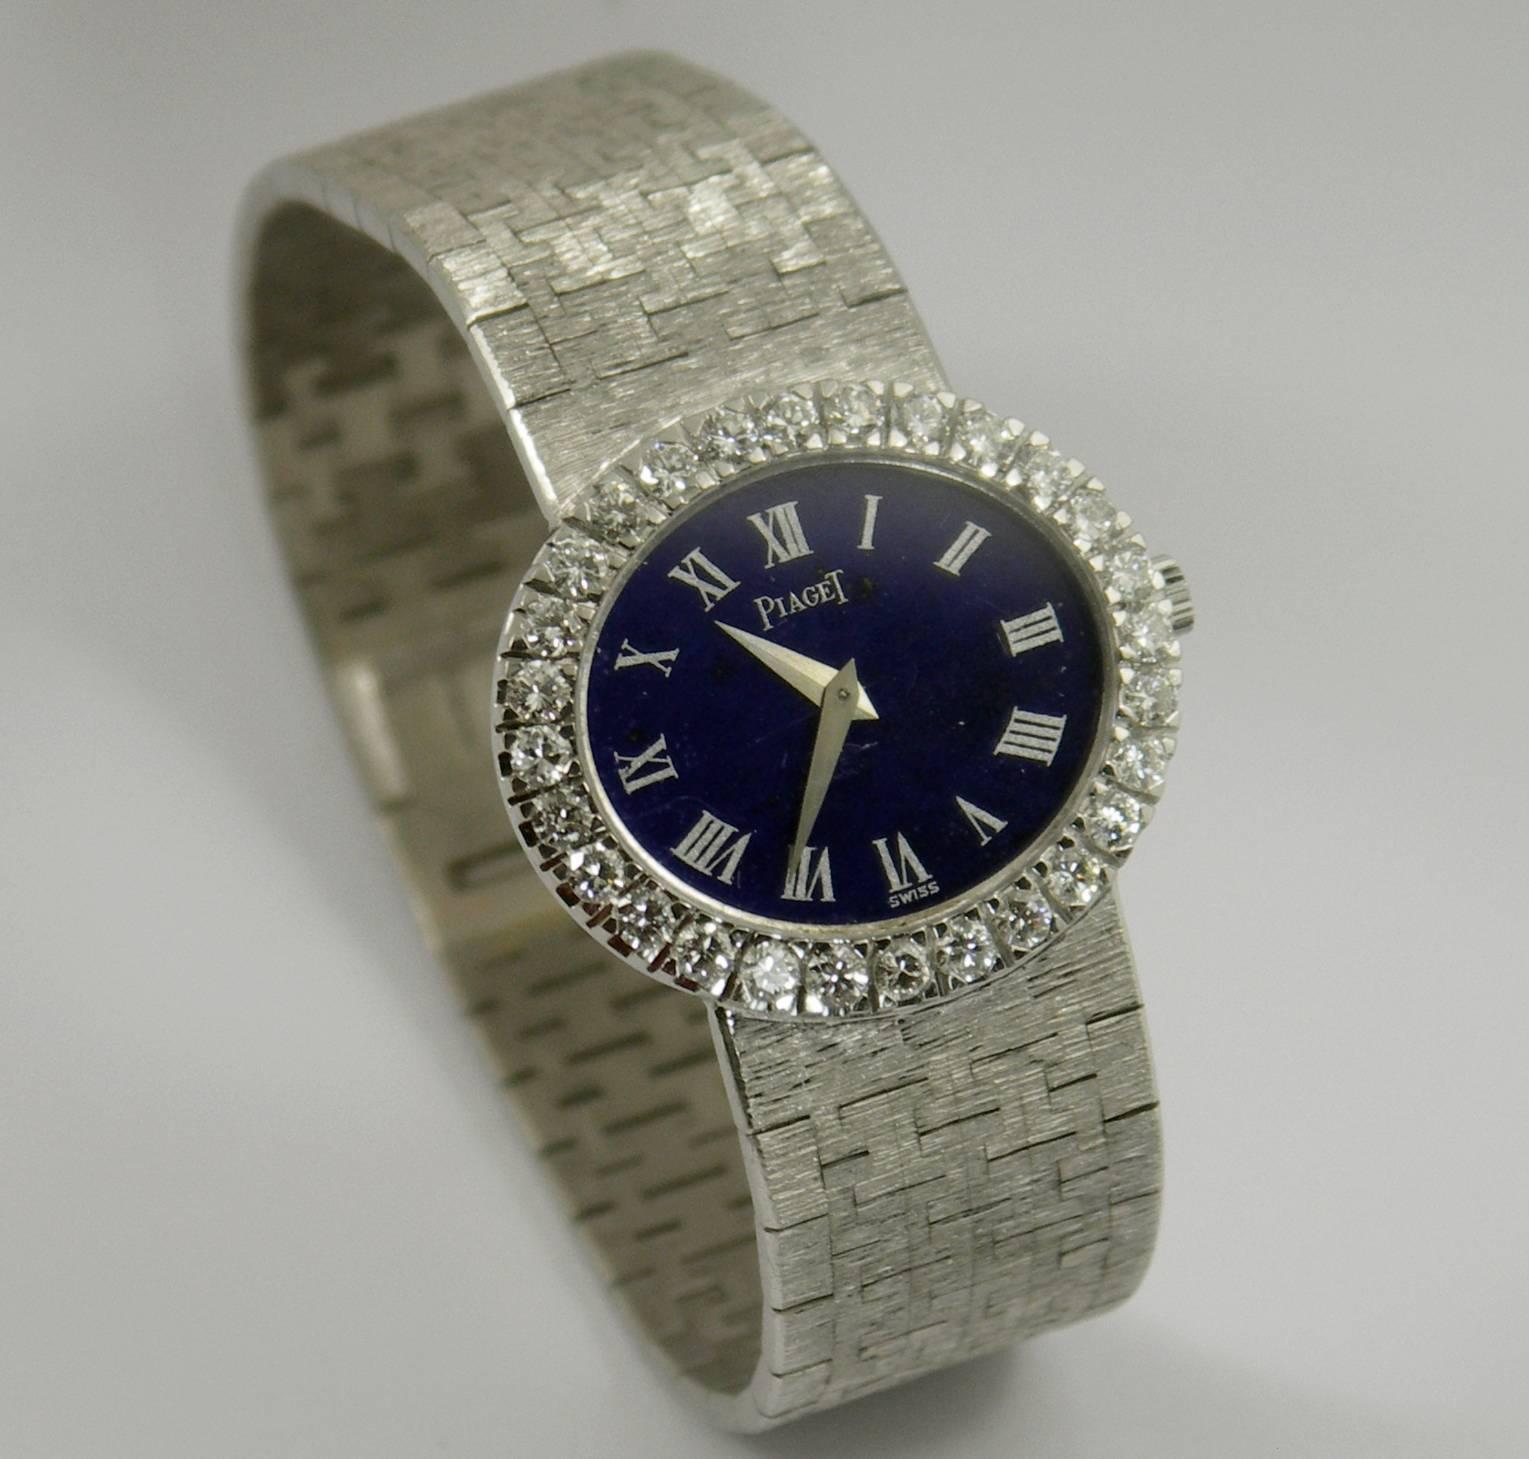 A lady's 18K white gold Piaget wristwatch with a deep blue, lapis lazuli dial with Roman numerals. Surrounding the case is a bezel measuring 20mm X 26mm, and set with 28 round brilliant cut diamonds, weighing 2.50ct total approximate weight. Overall